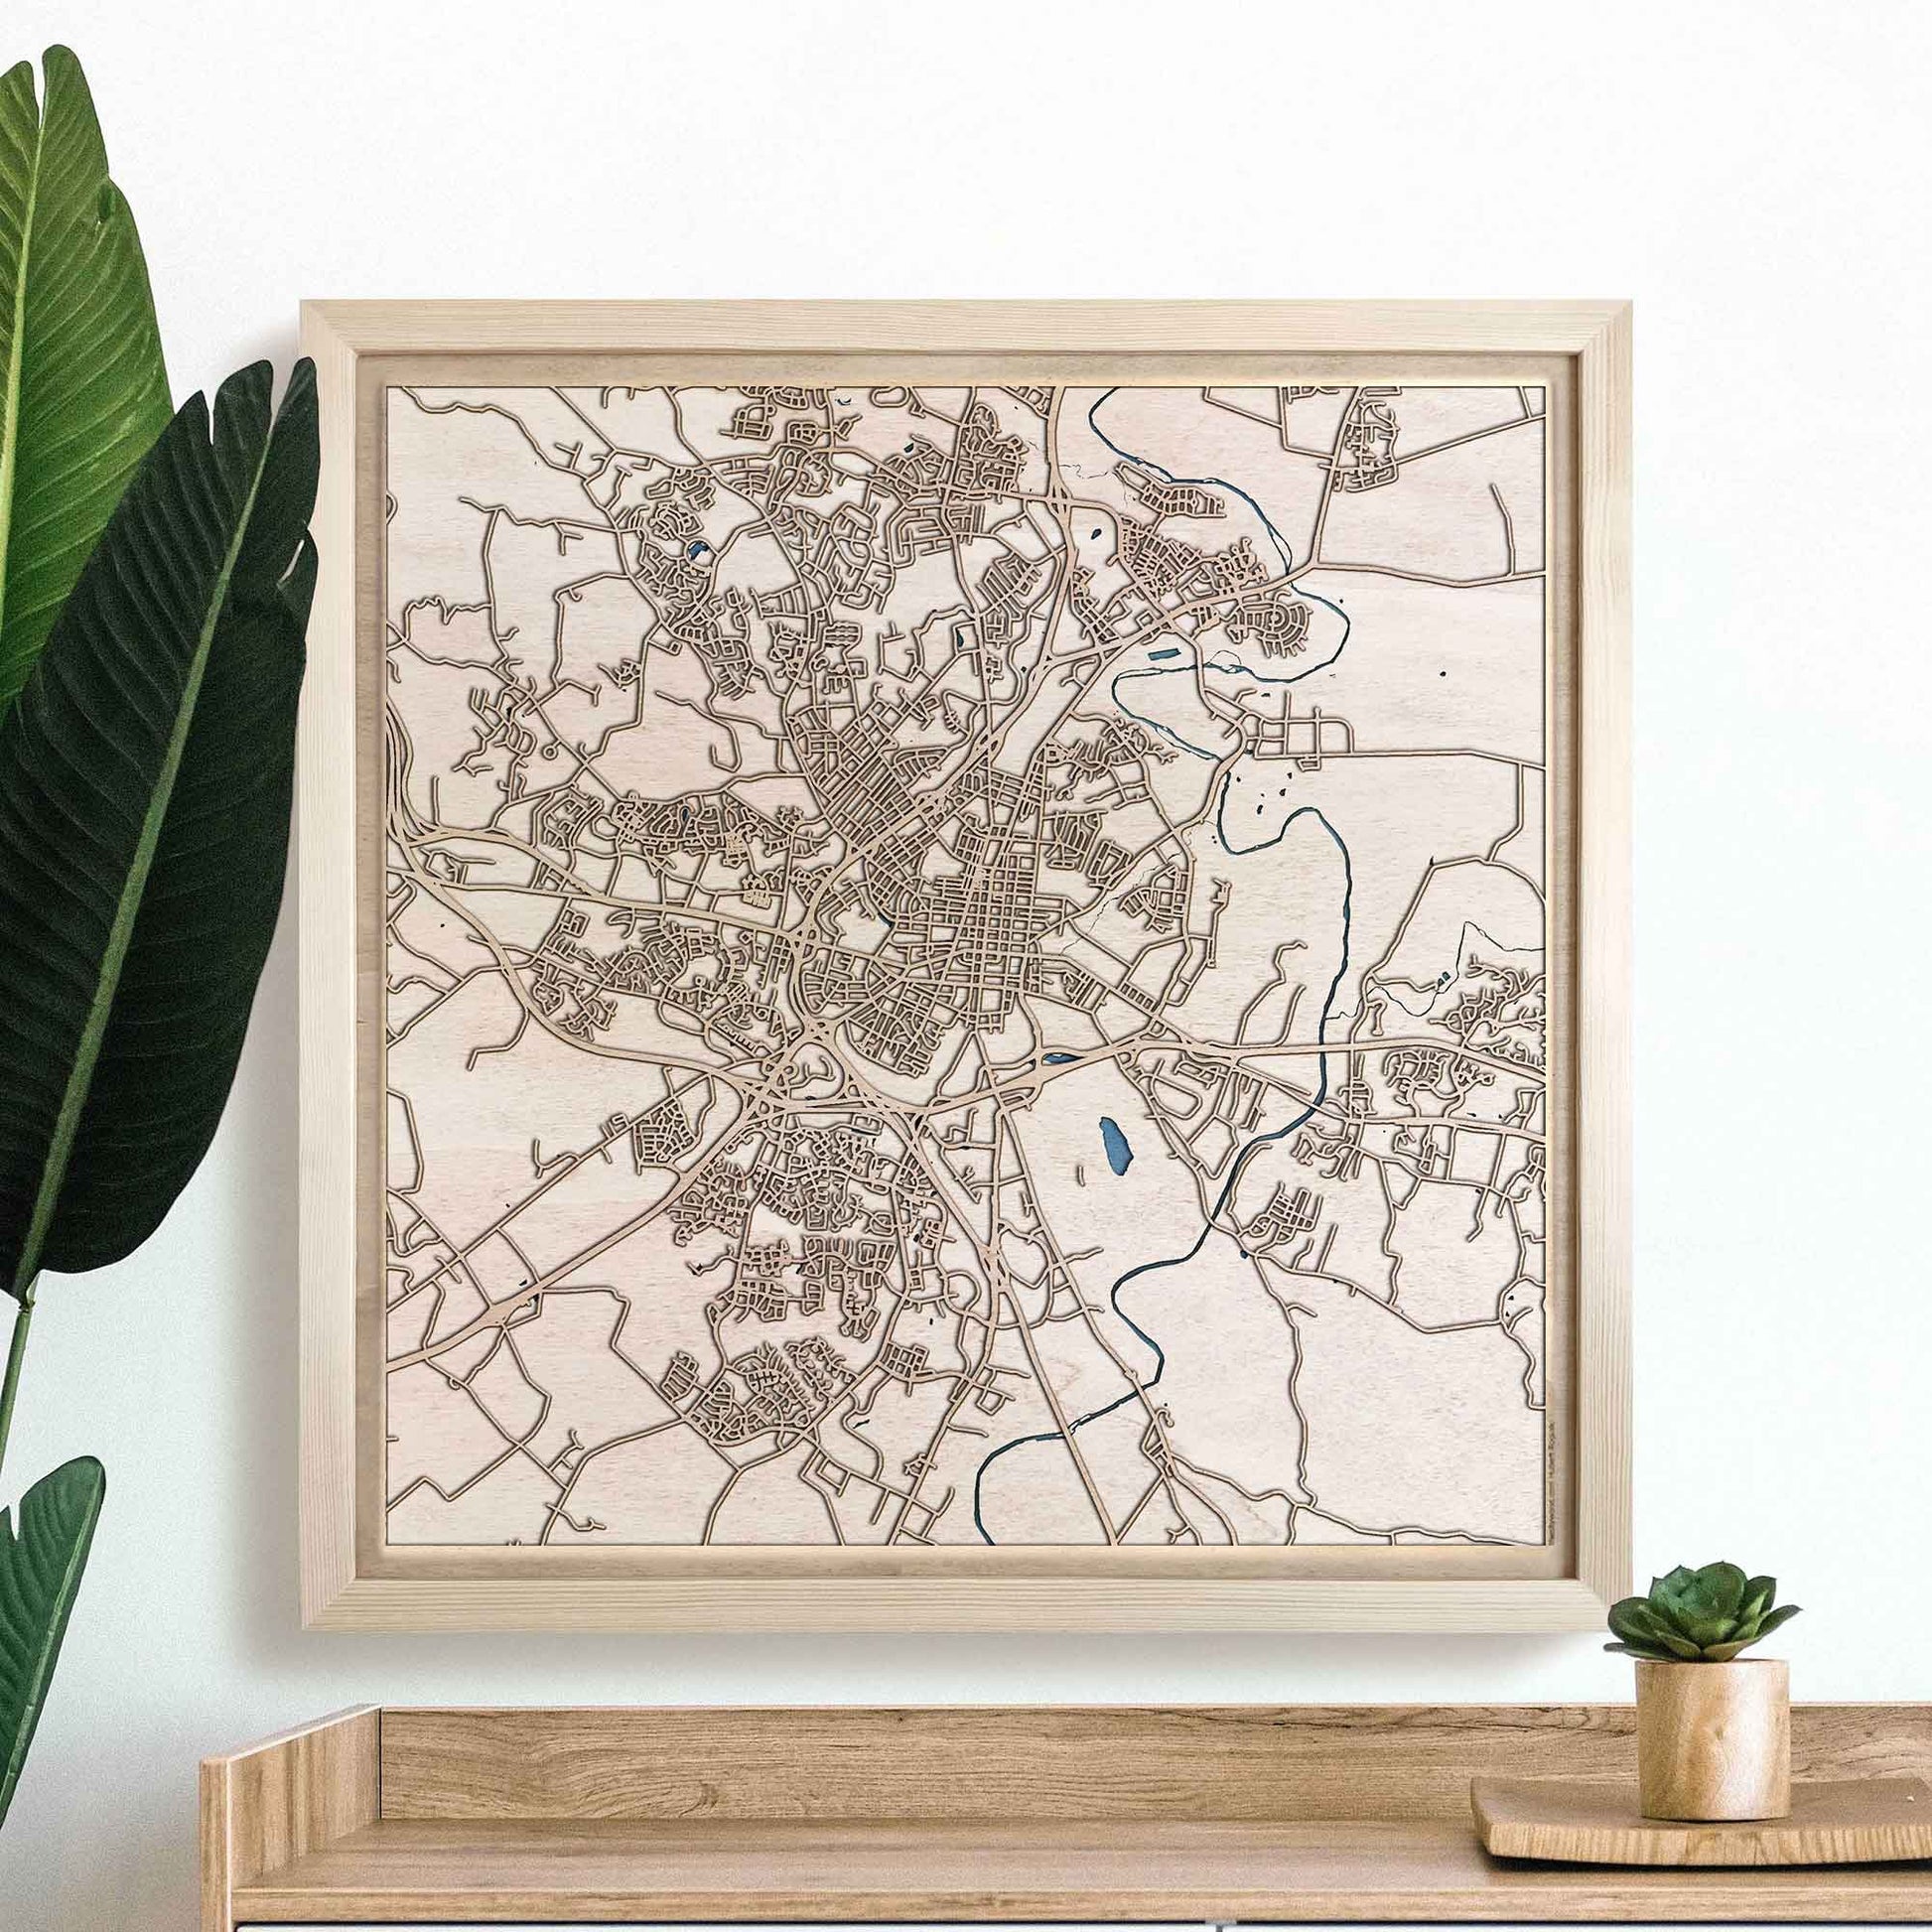 Frederick Wooden Map by CityWood - Custom Wood Map Art - Unique Laser Cut Engraved - Anniversary Gift